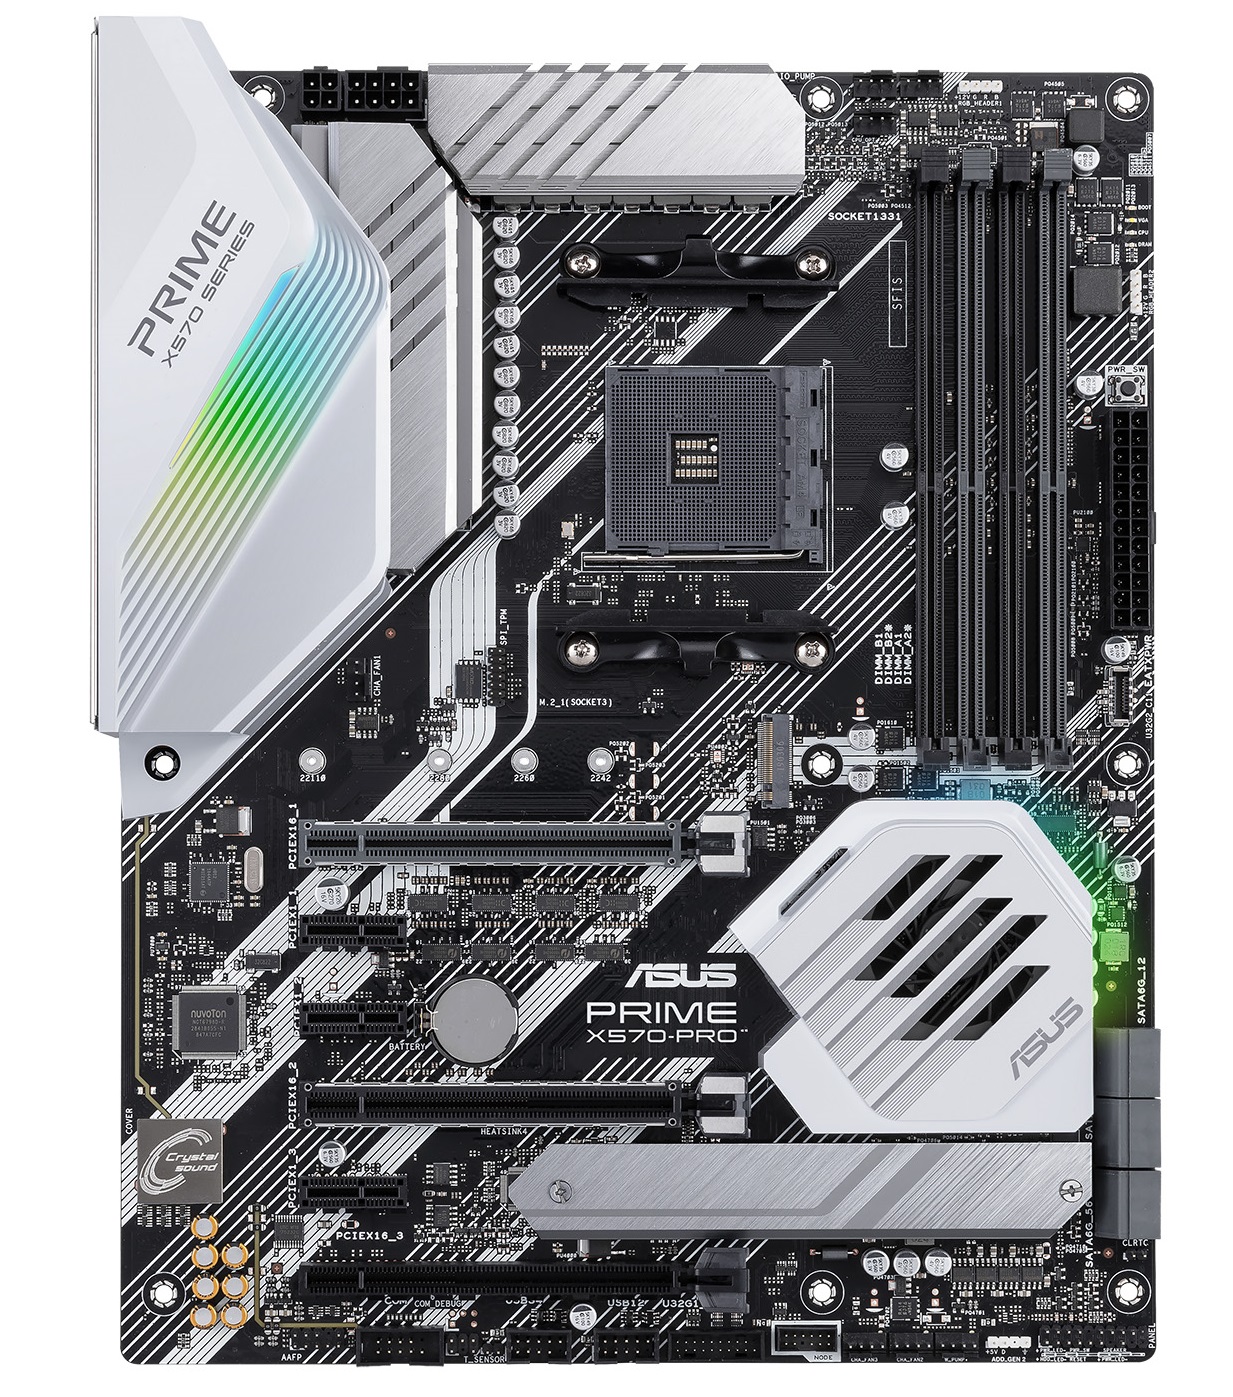 Asus Prime X570 Pro The Amd X570 Motherboard Overview Over 35 Motherboards Analyzed